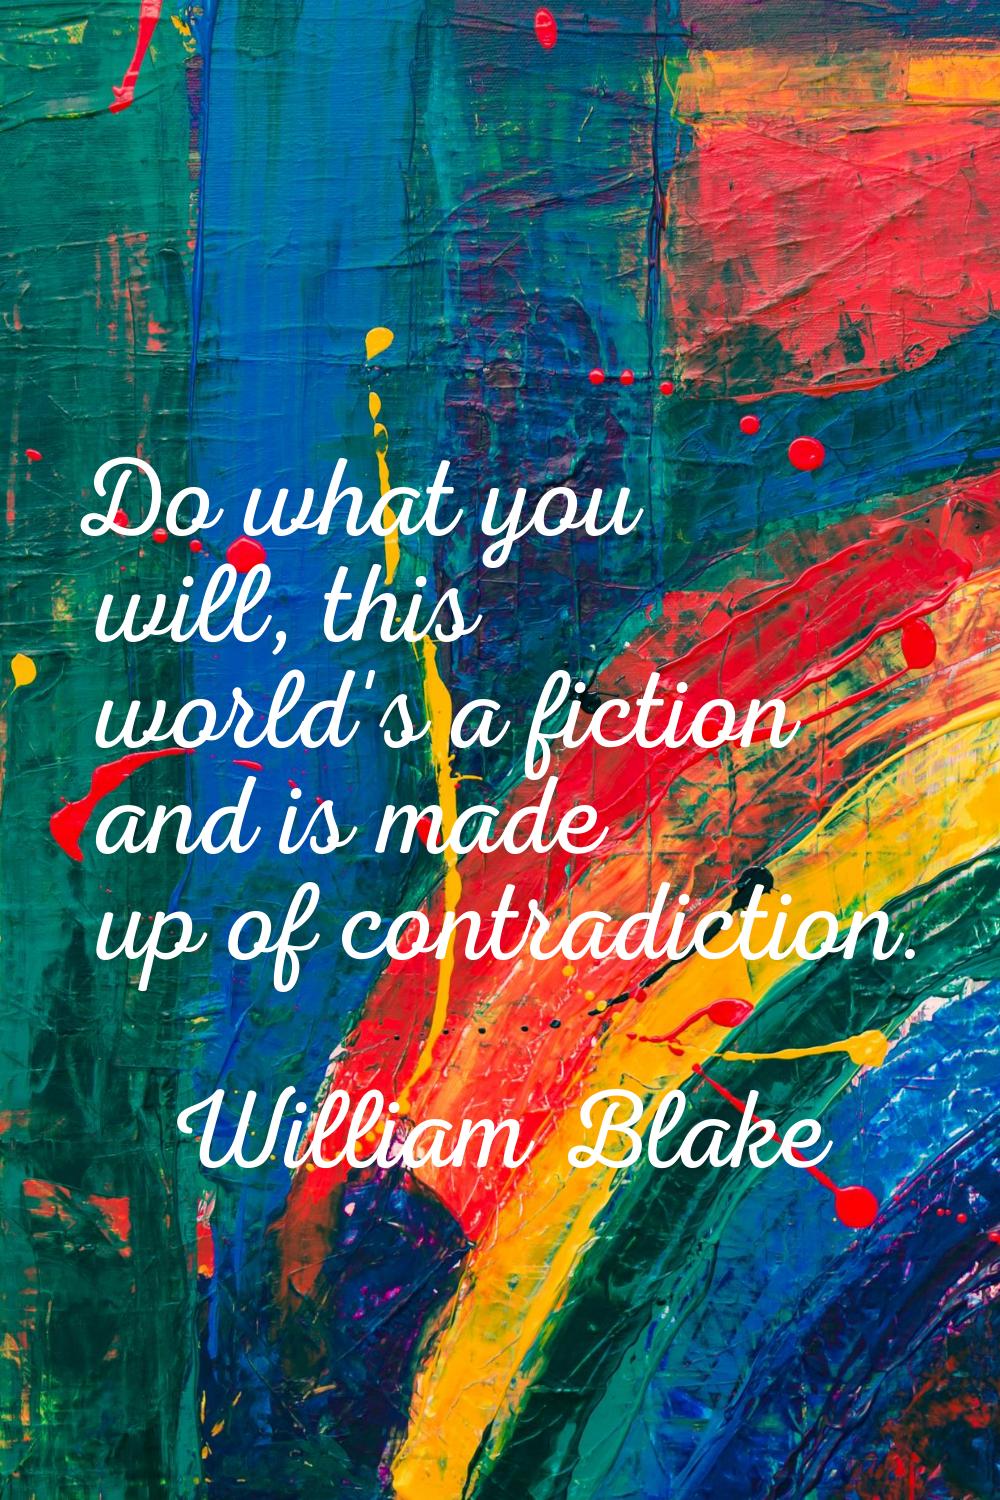 Do what you will, this world's a fiction and is made up of contradiction.